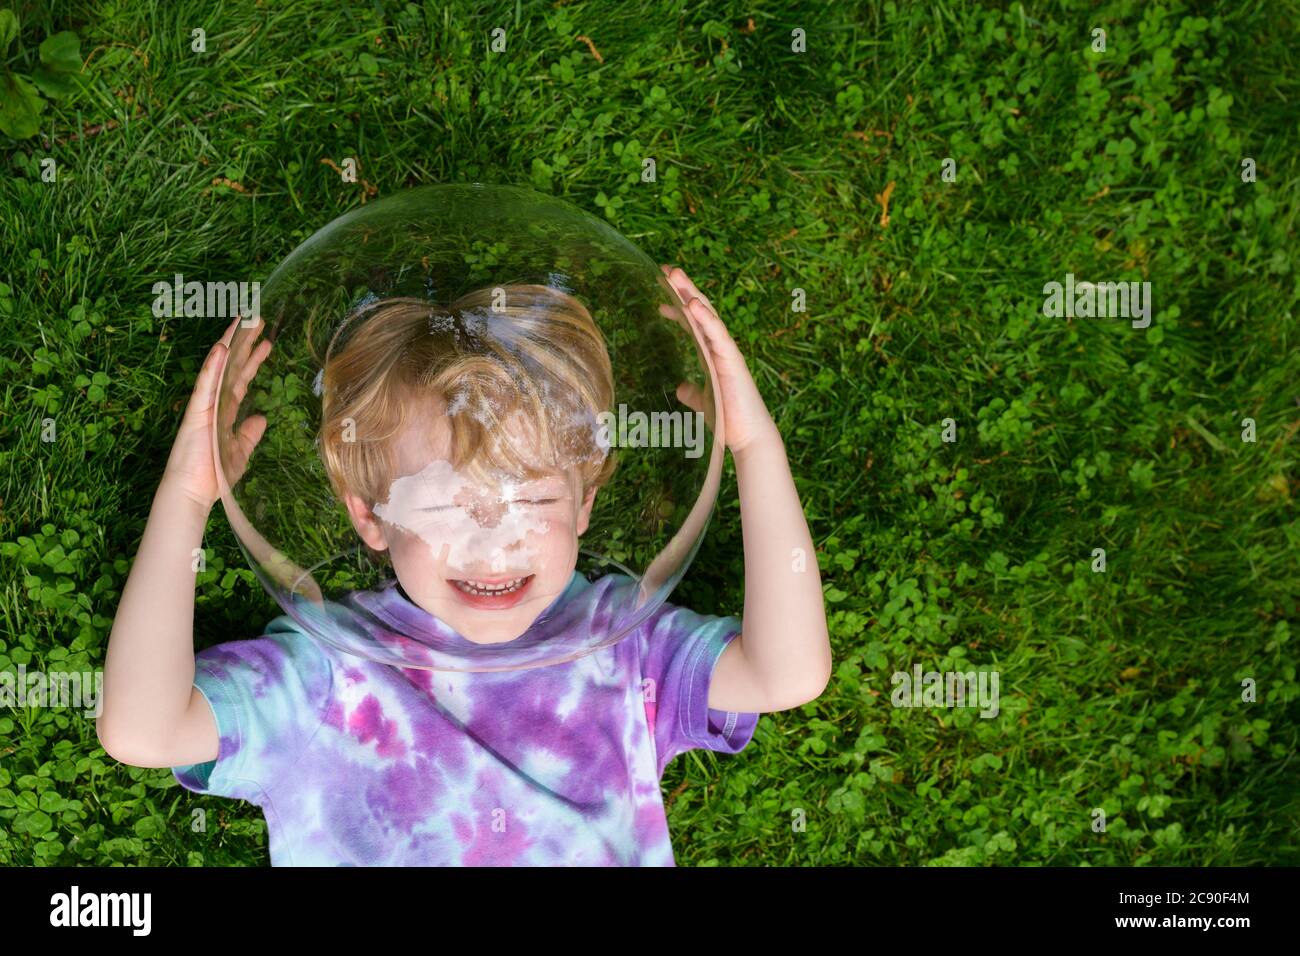 Boy wearing bubble outdoors to socially distance Stock Photo